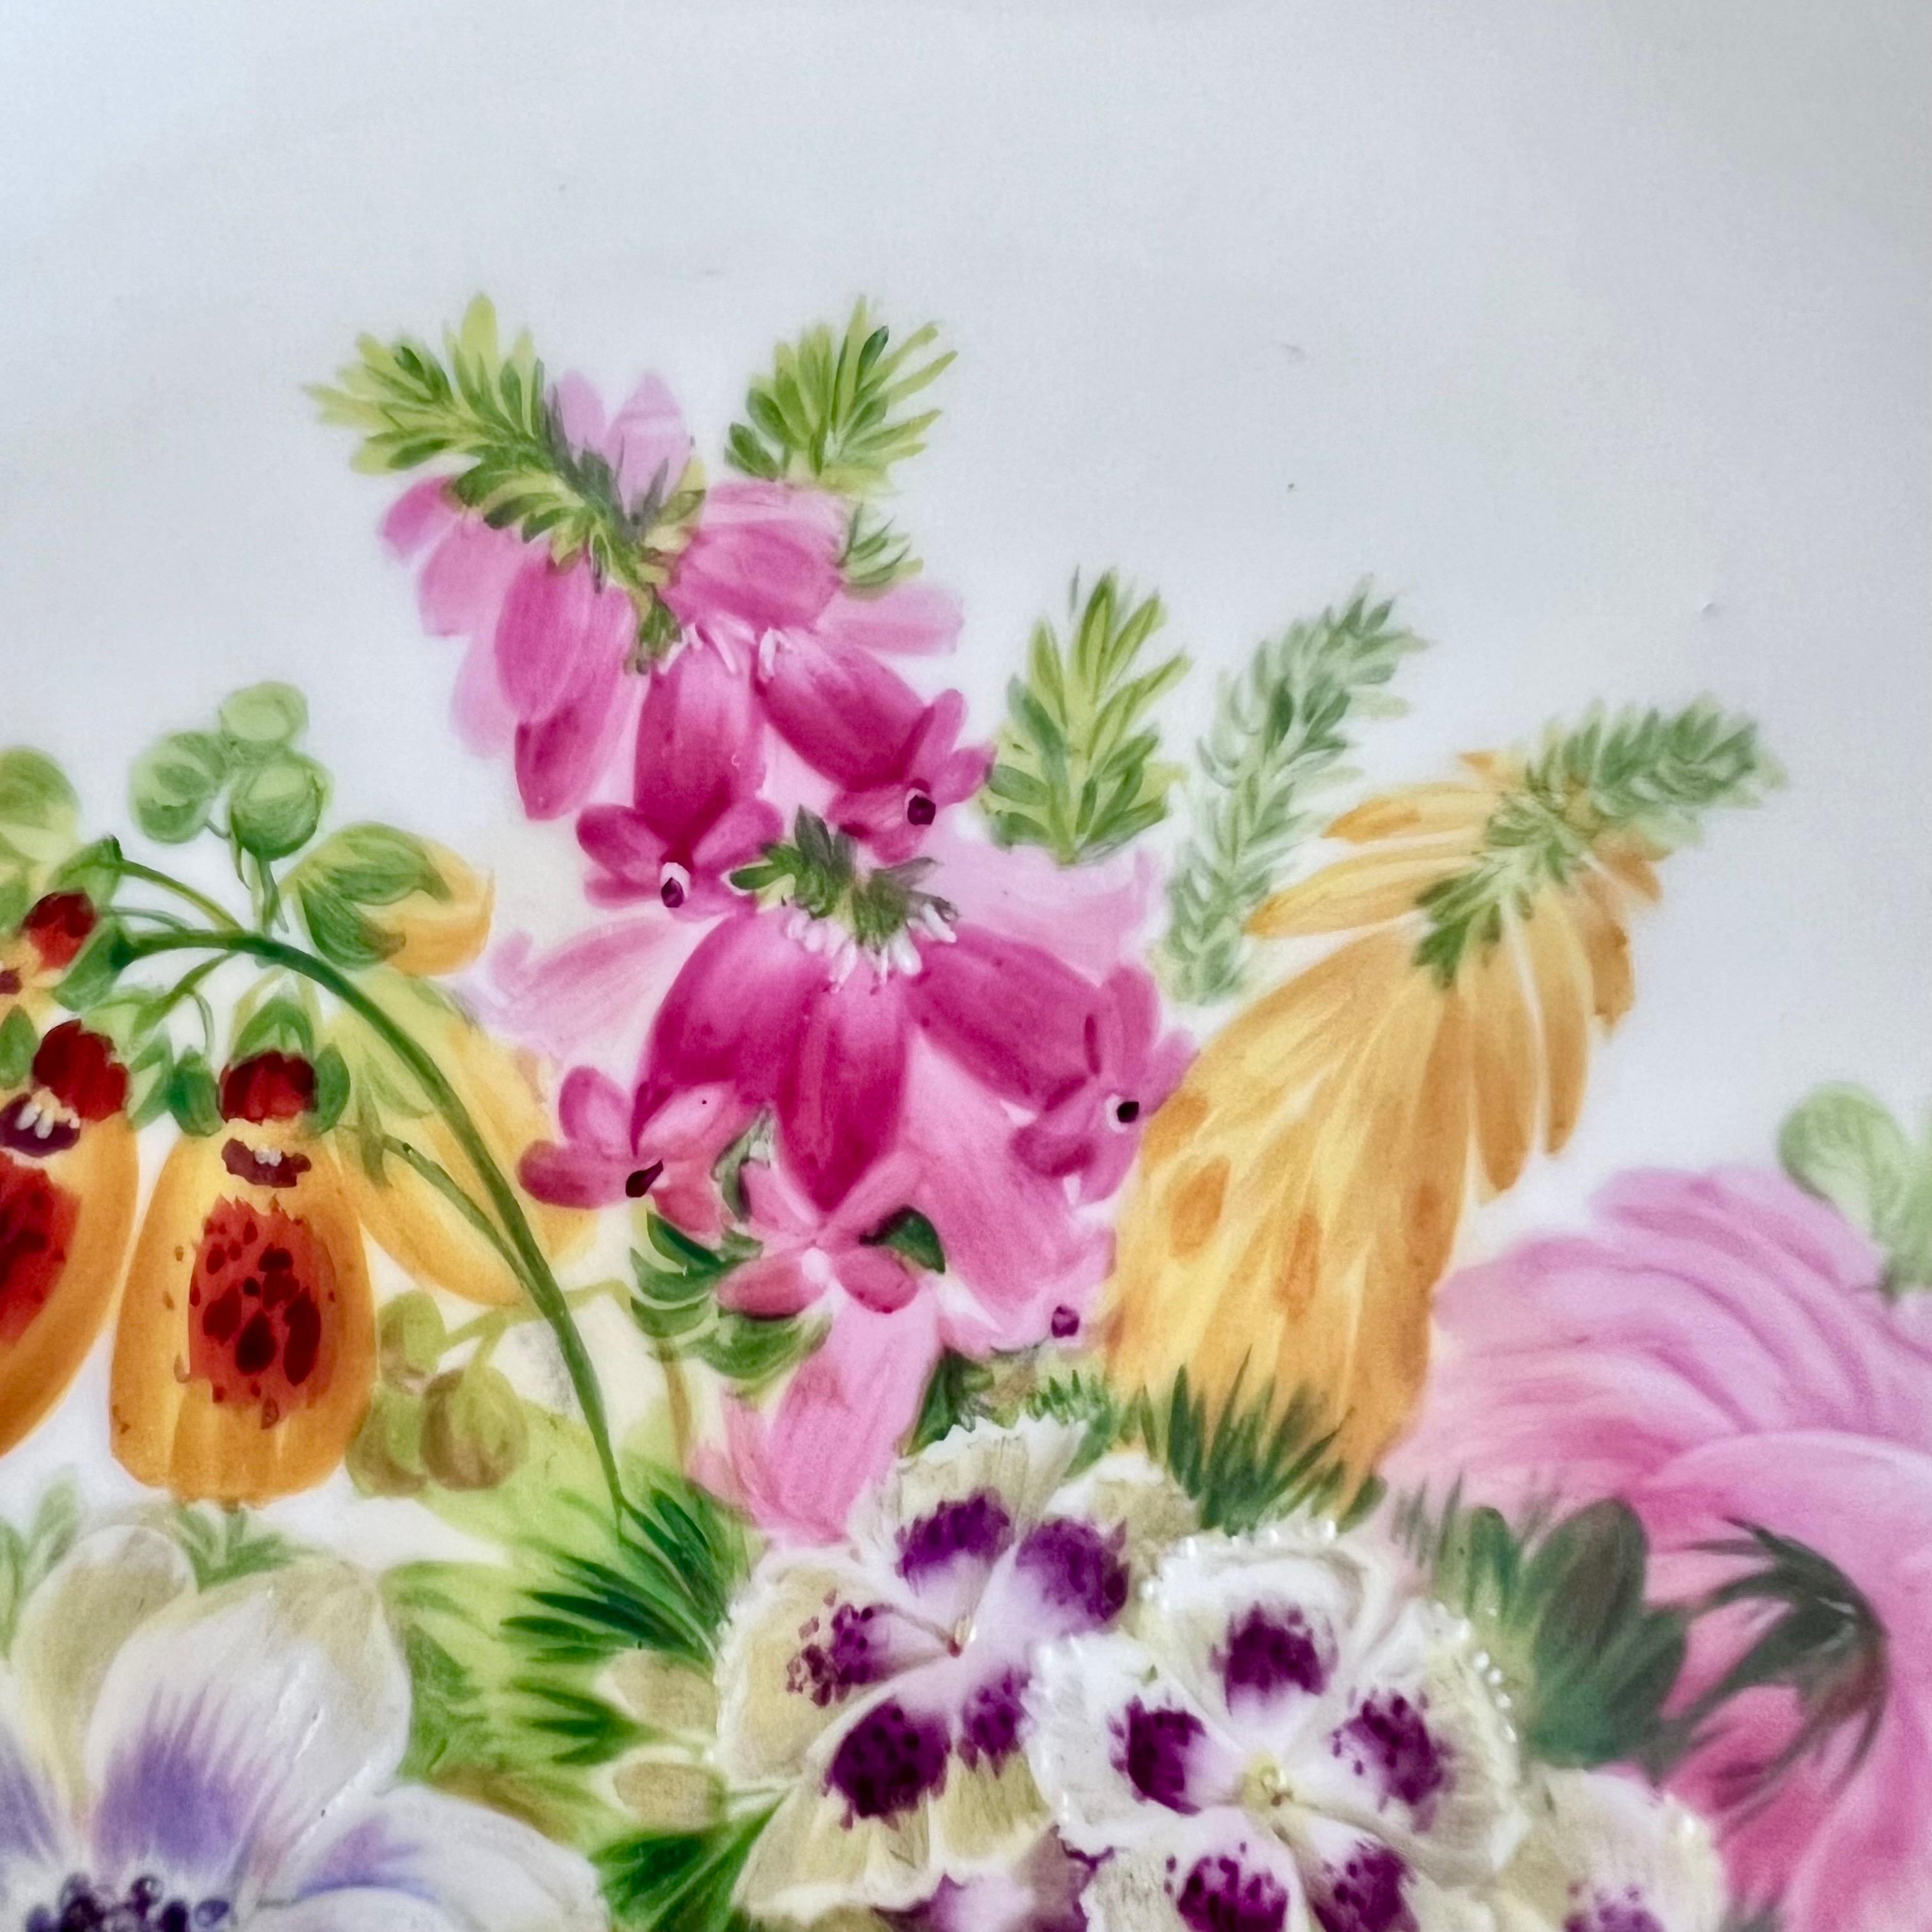 Copeland Plate, Reticulated, Sublime Flowers by Greatbatch, 1848 (3) For Sale 2